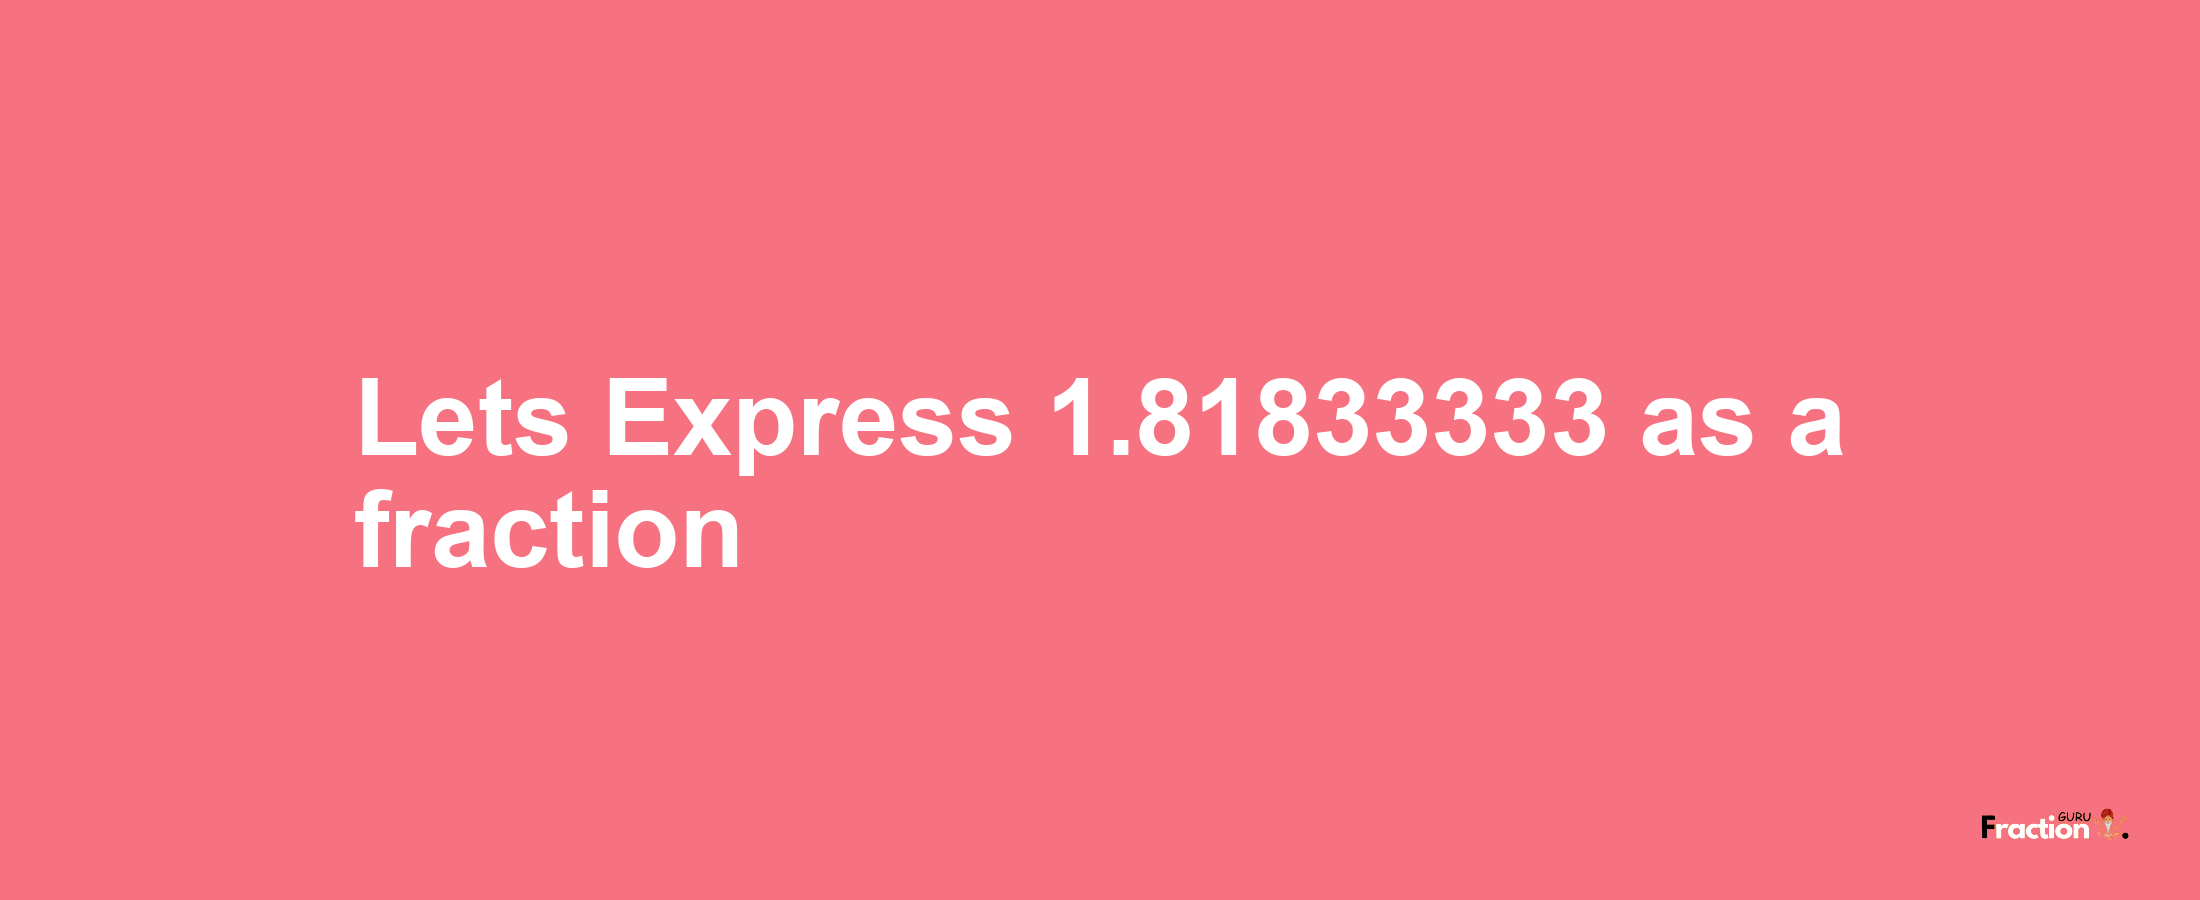 Lets Express 1.81833333 as afraction